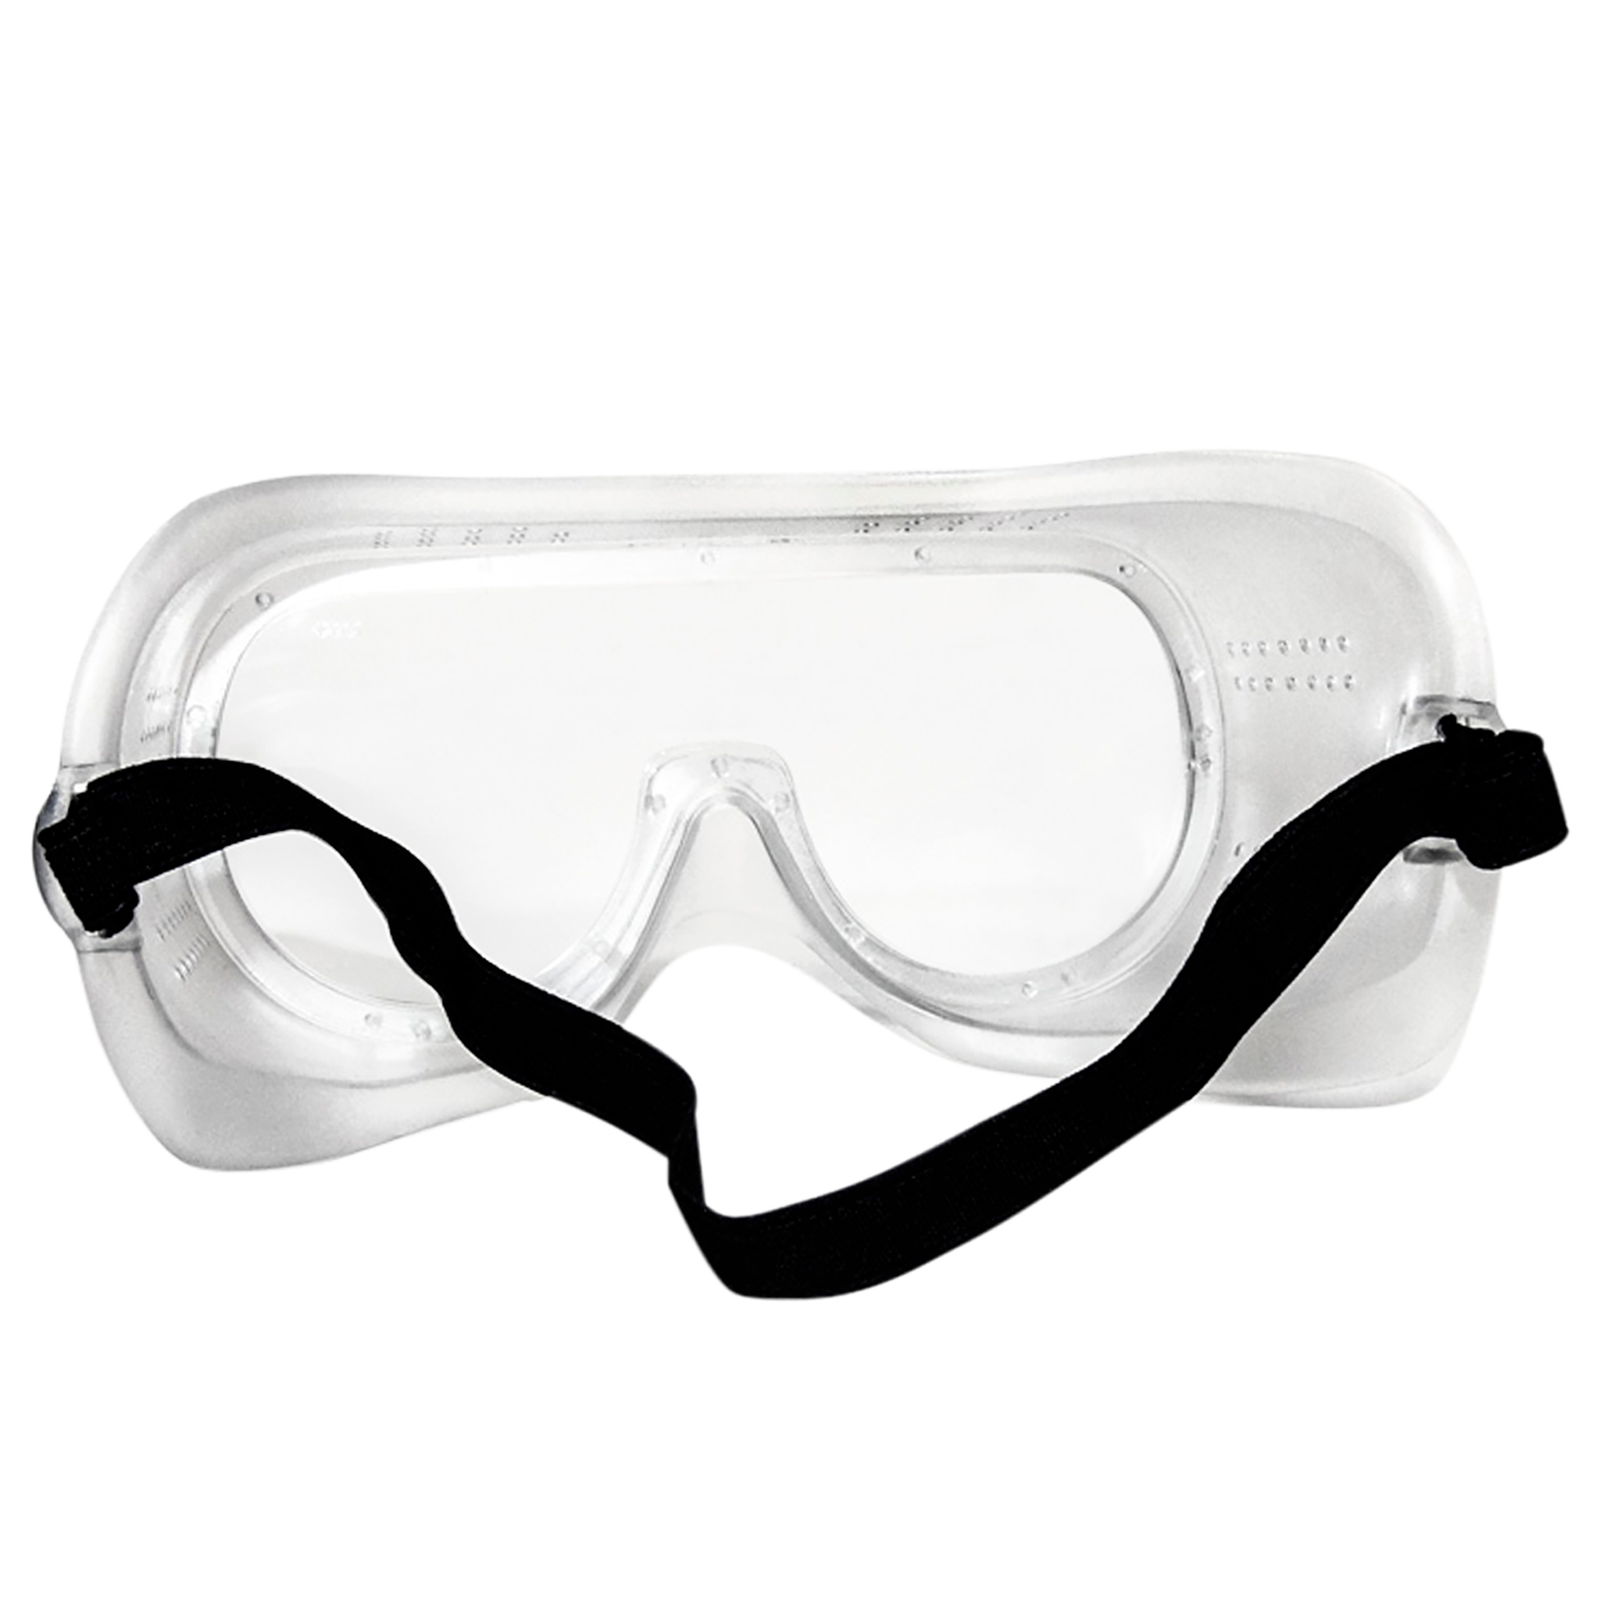 Back view of a JORESTECH safety goggle with ventilation breathability and for high impact protection